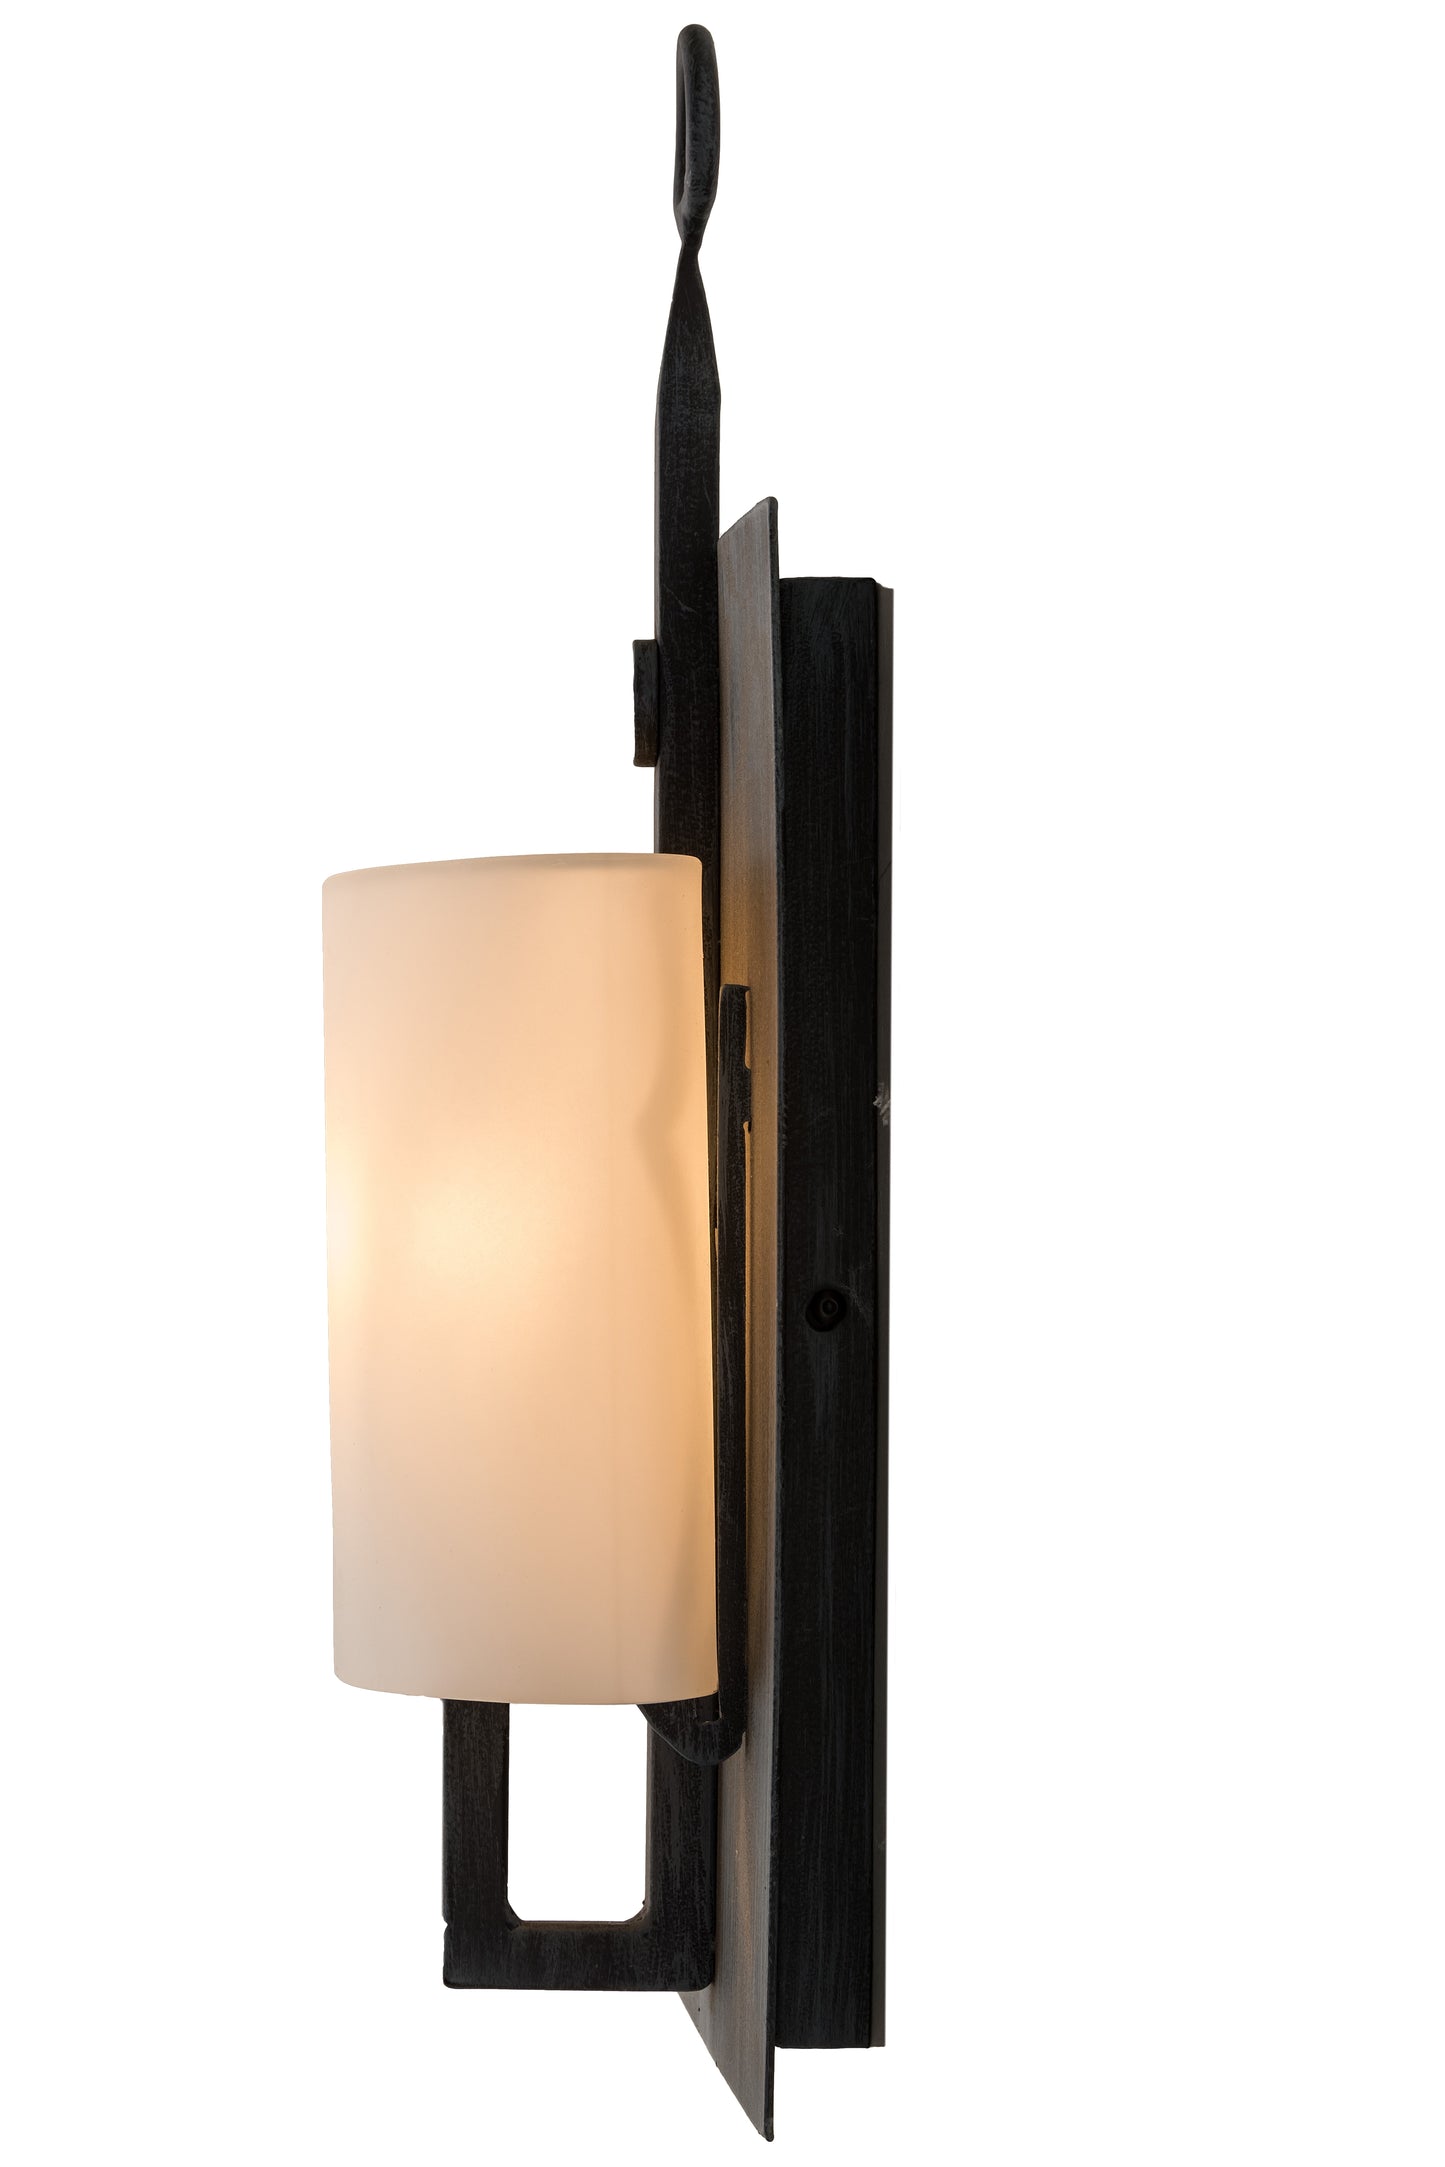 2nd Avenue 7.5" Wakefield Wall Sconce